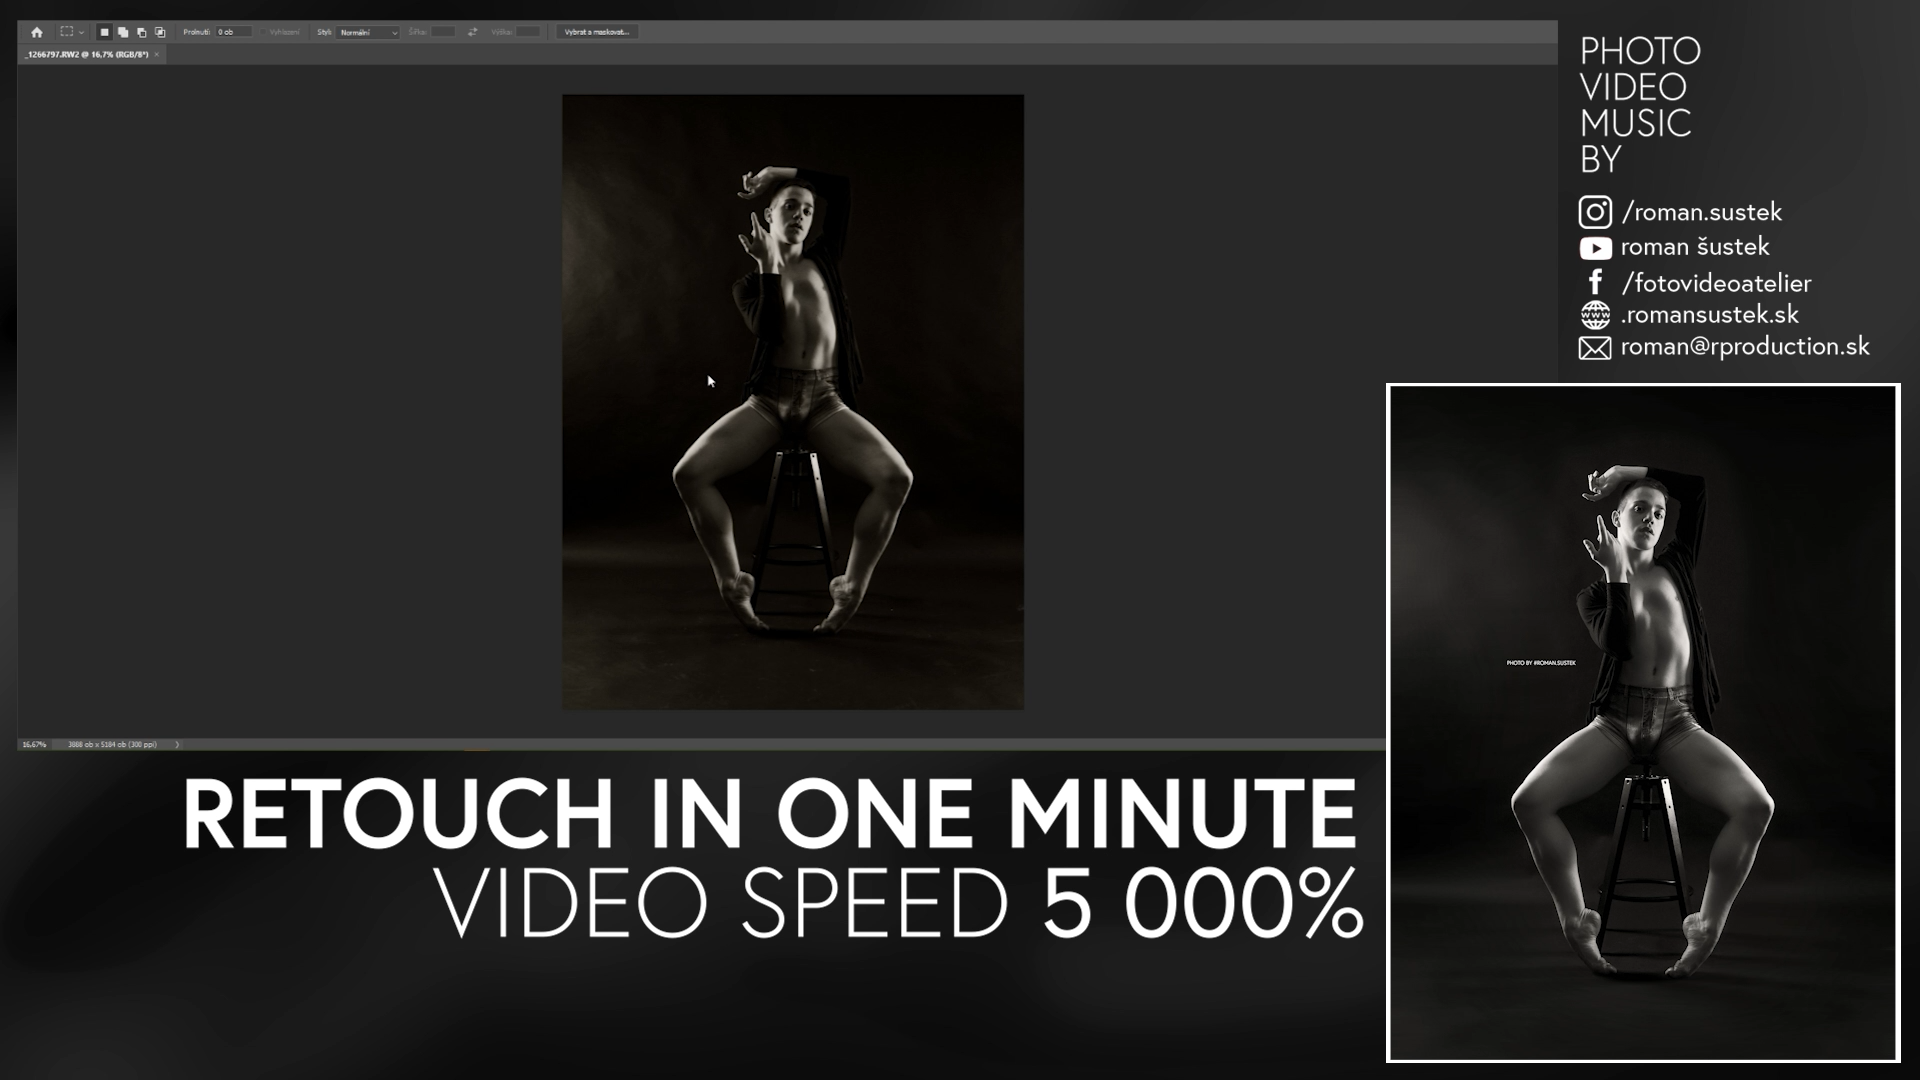 retouch photo with ballet dancer from Slovakia, 5 000% video speed, retouch in one minute